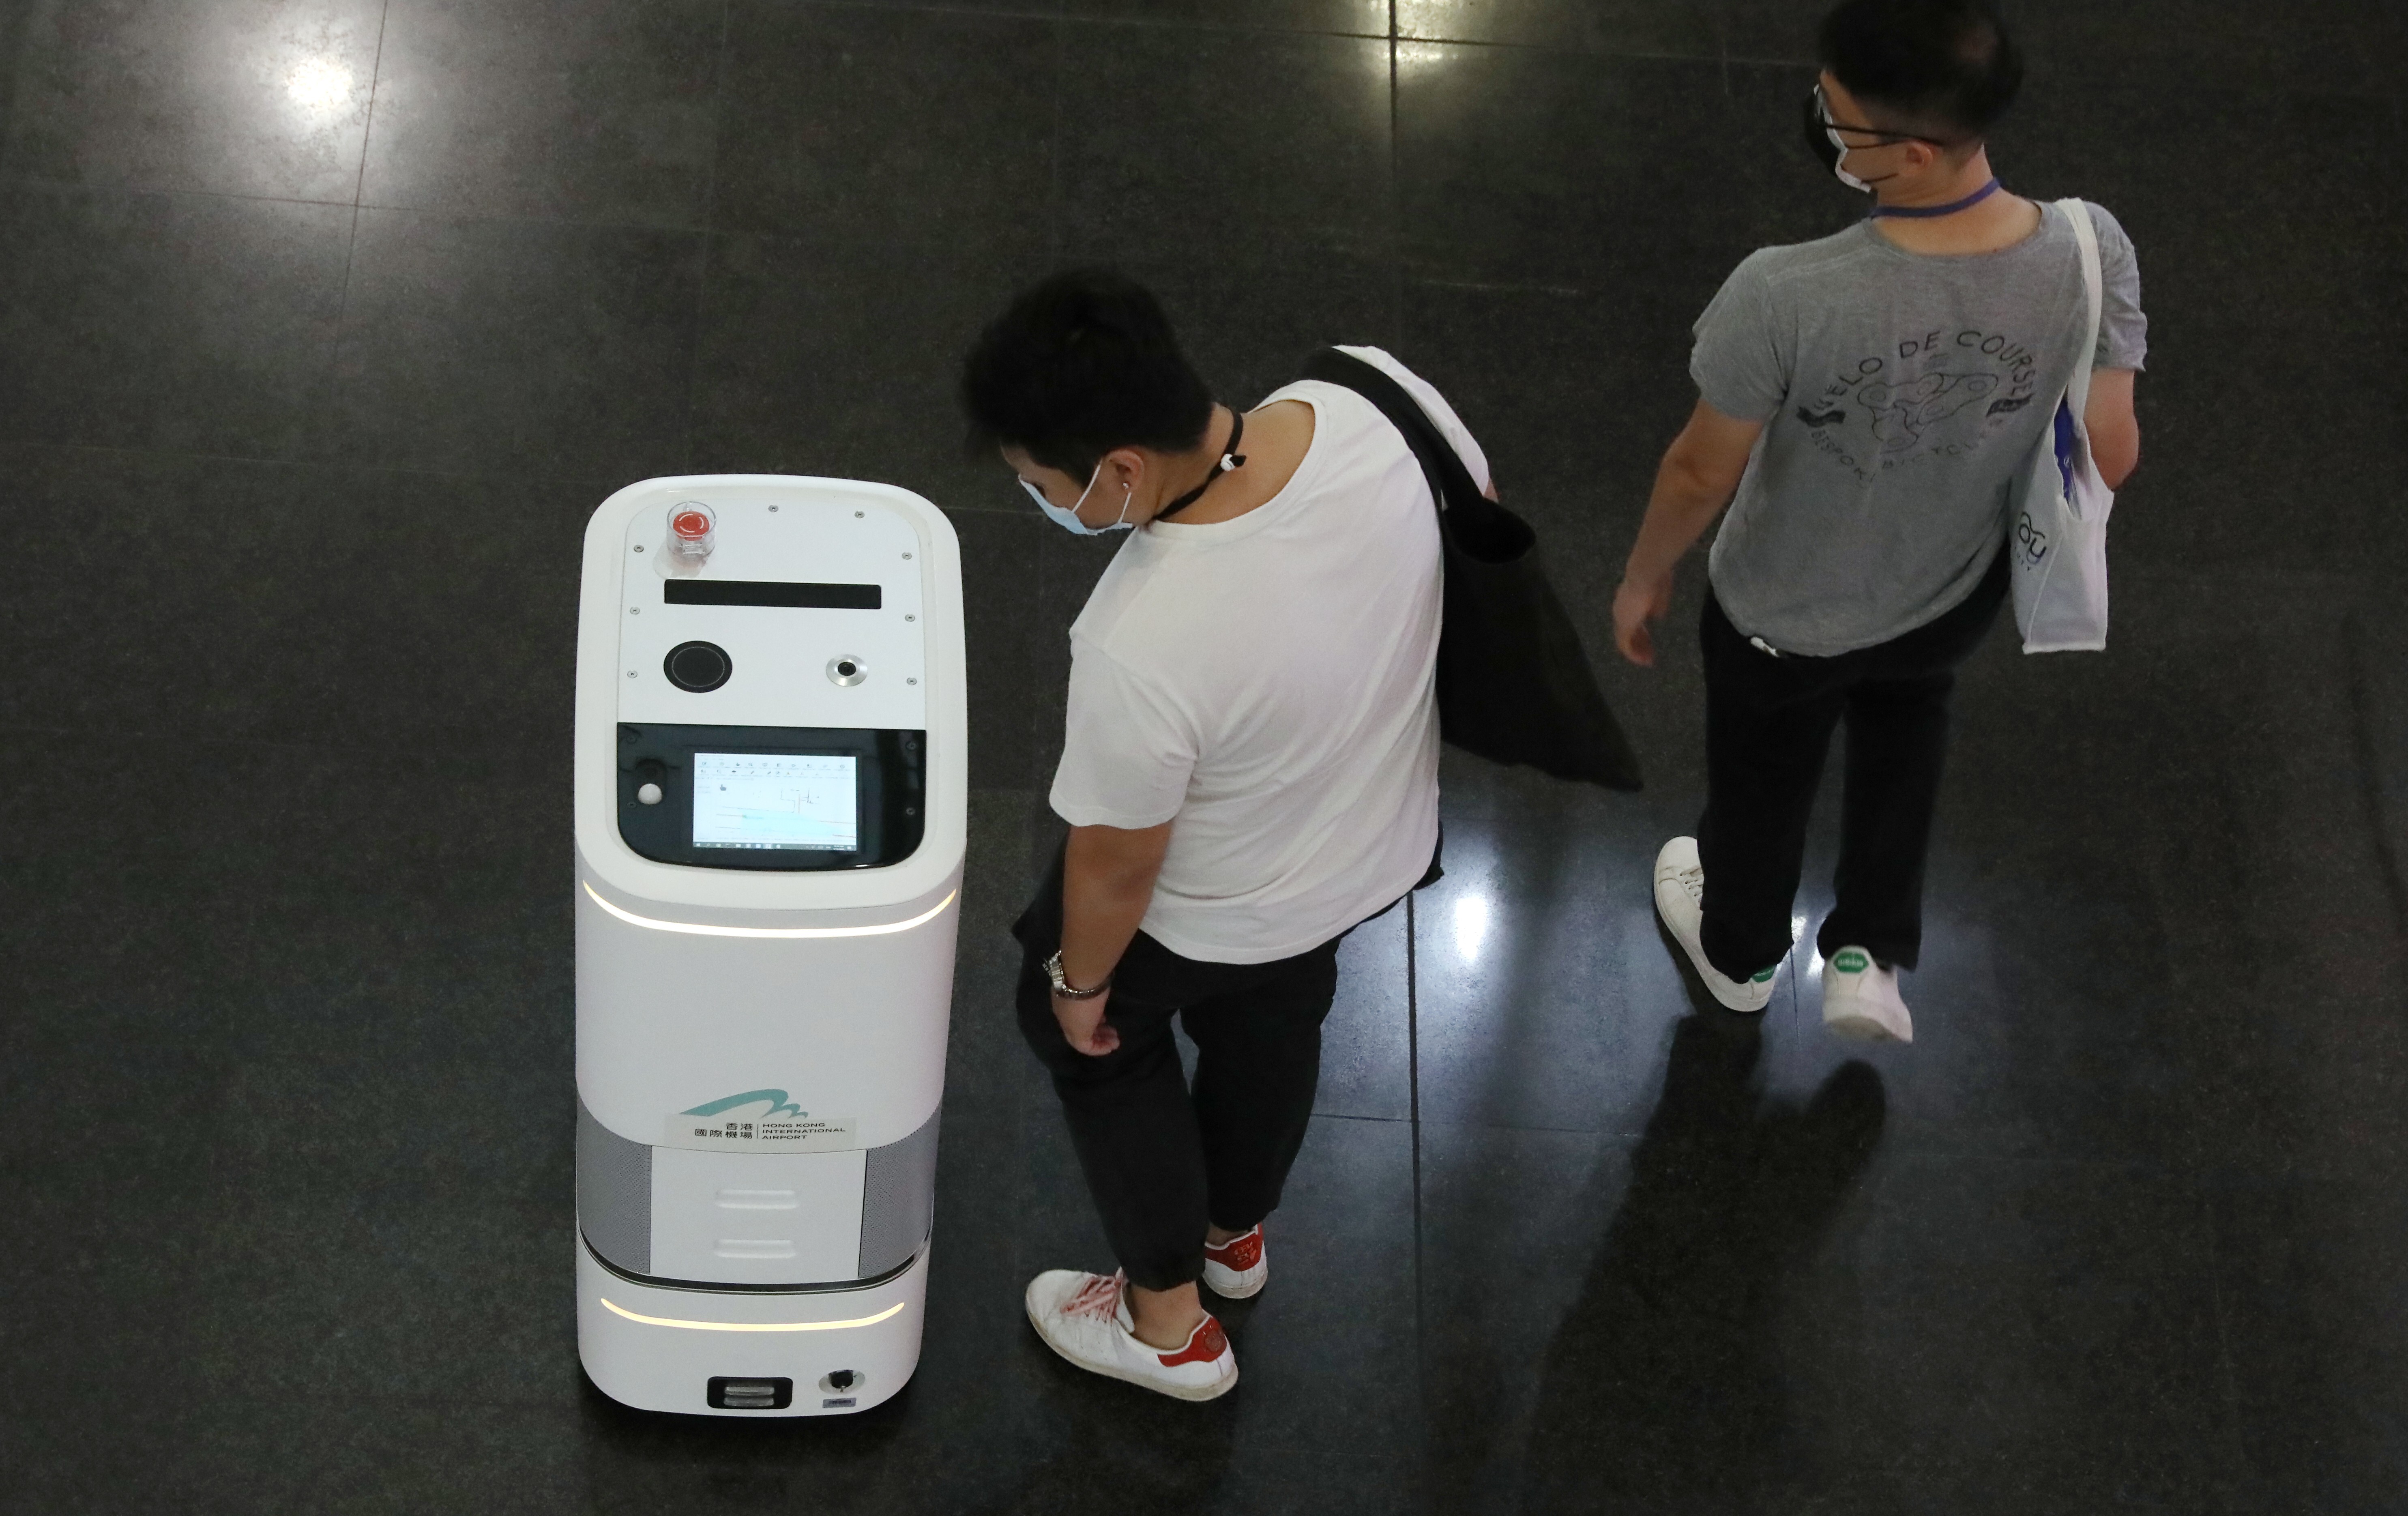 Property companies are turning to technology such as robots to disinfect buildings to create a safe environment for people amid the coronavirus pandemic. Photo: K.Y. Cheng